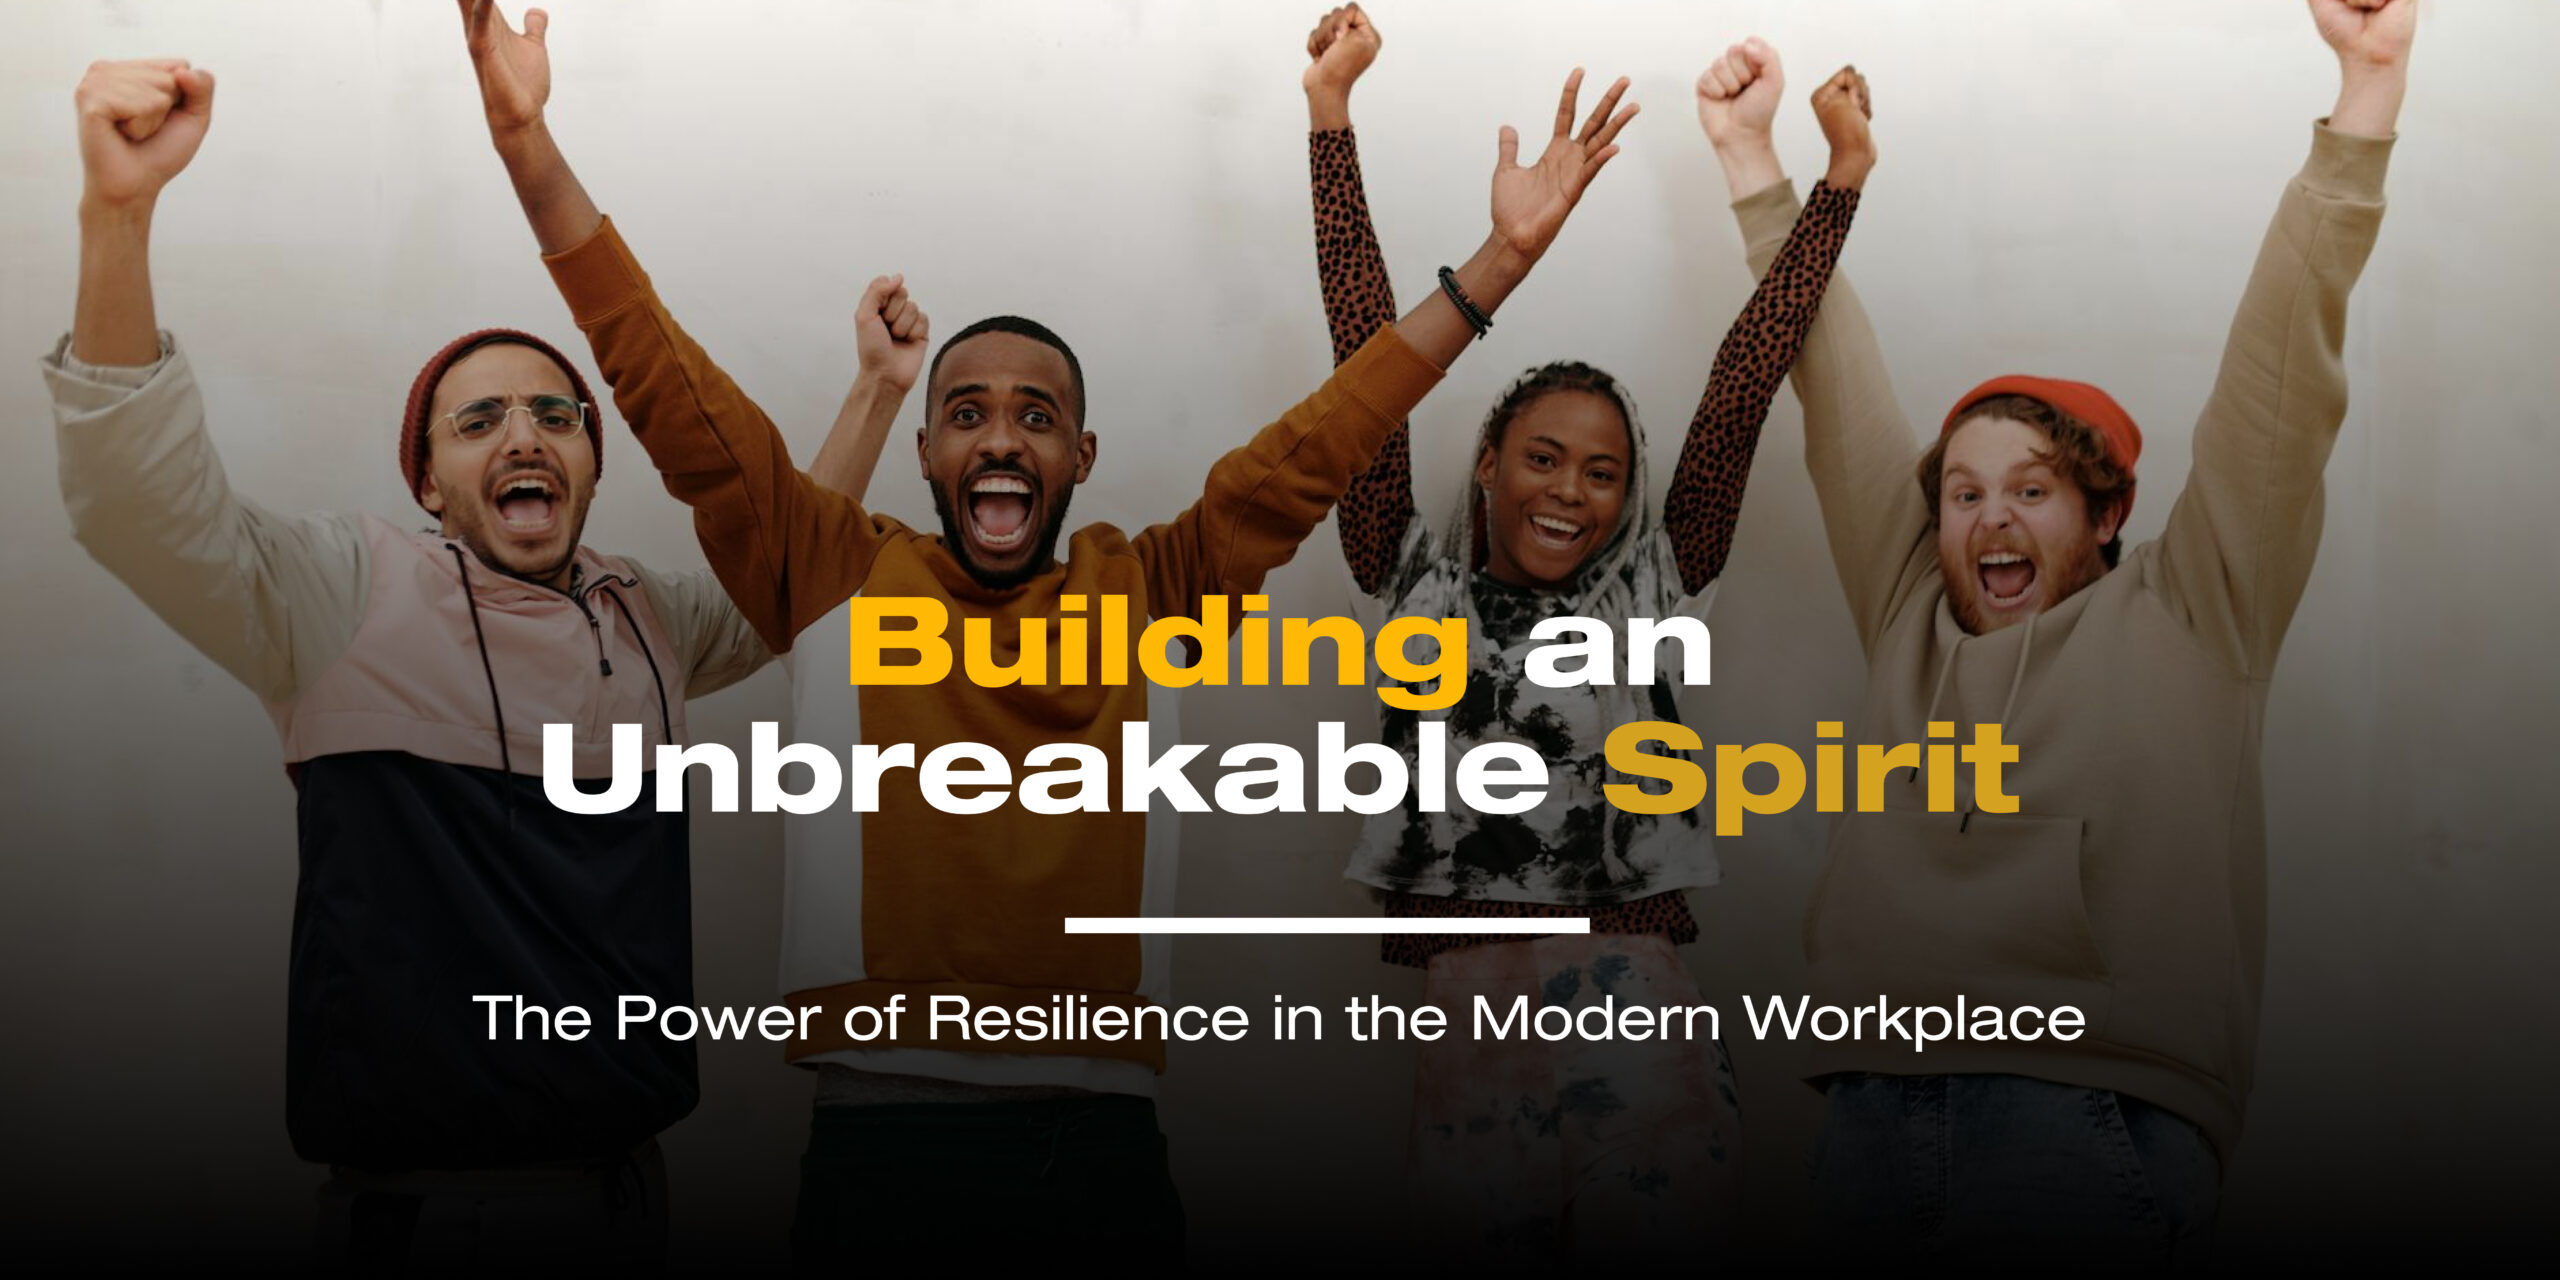 Building an Unbreakable Spirit: The Power of Resilience in the Modern Workplace